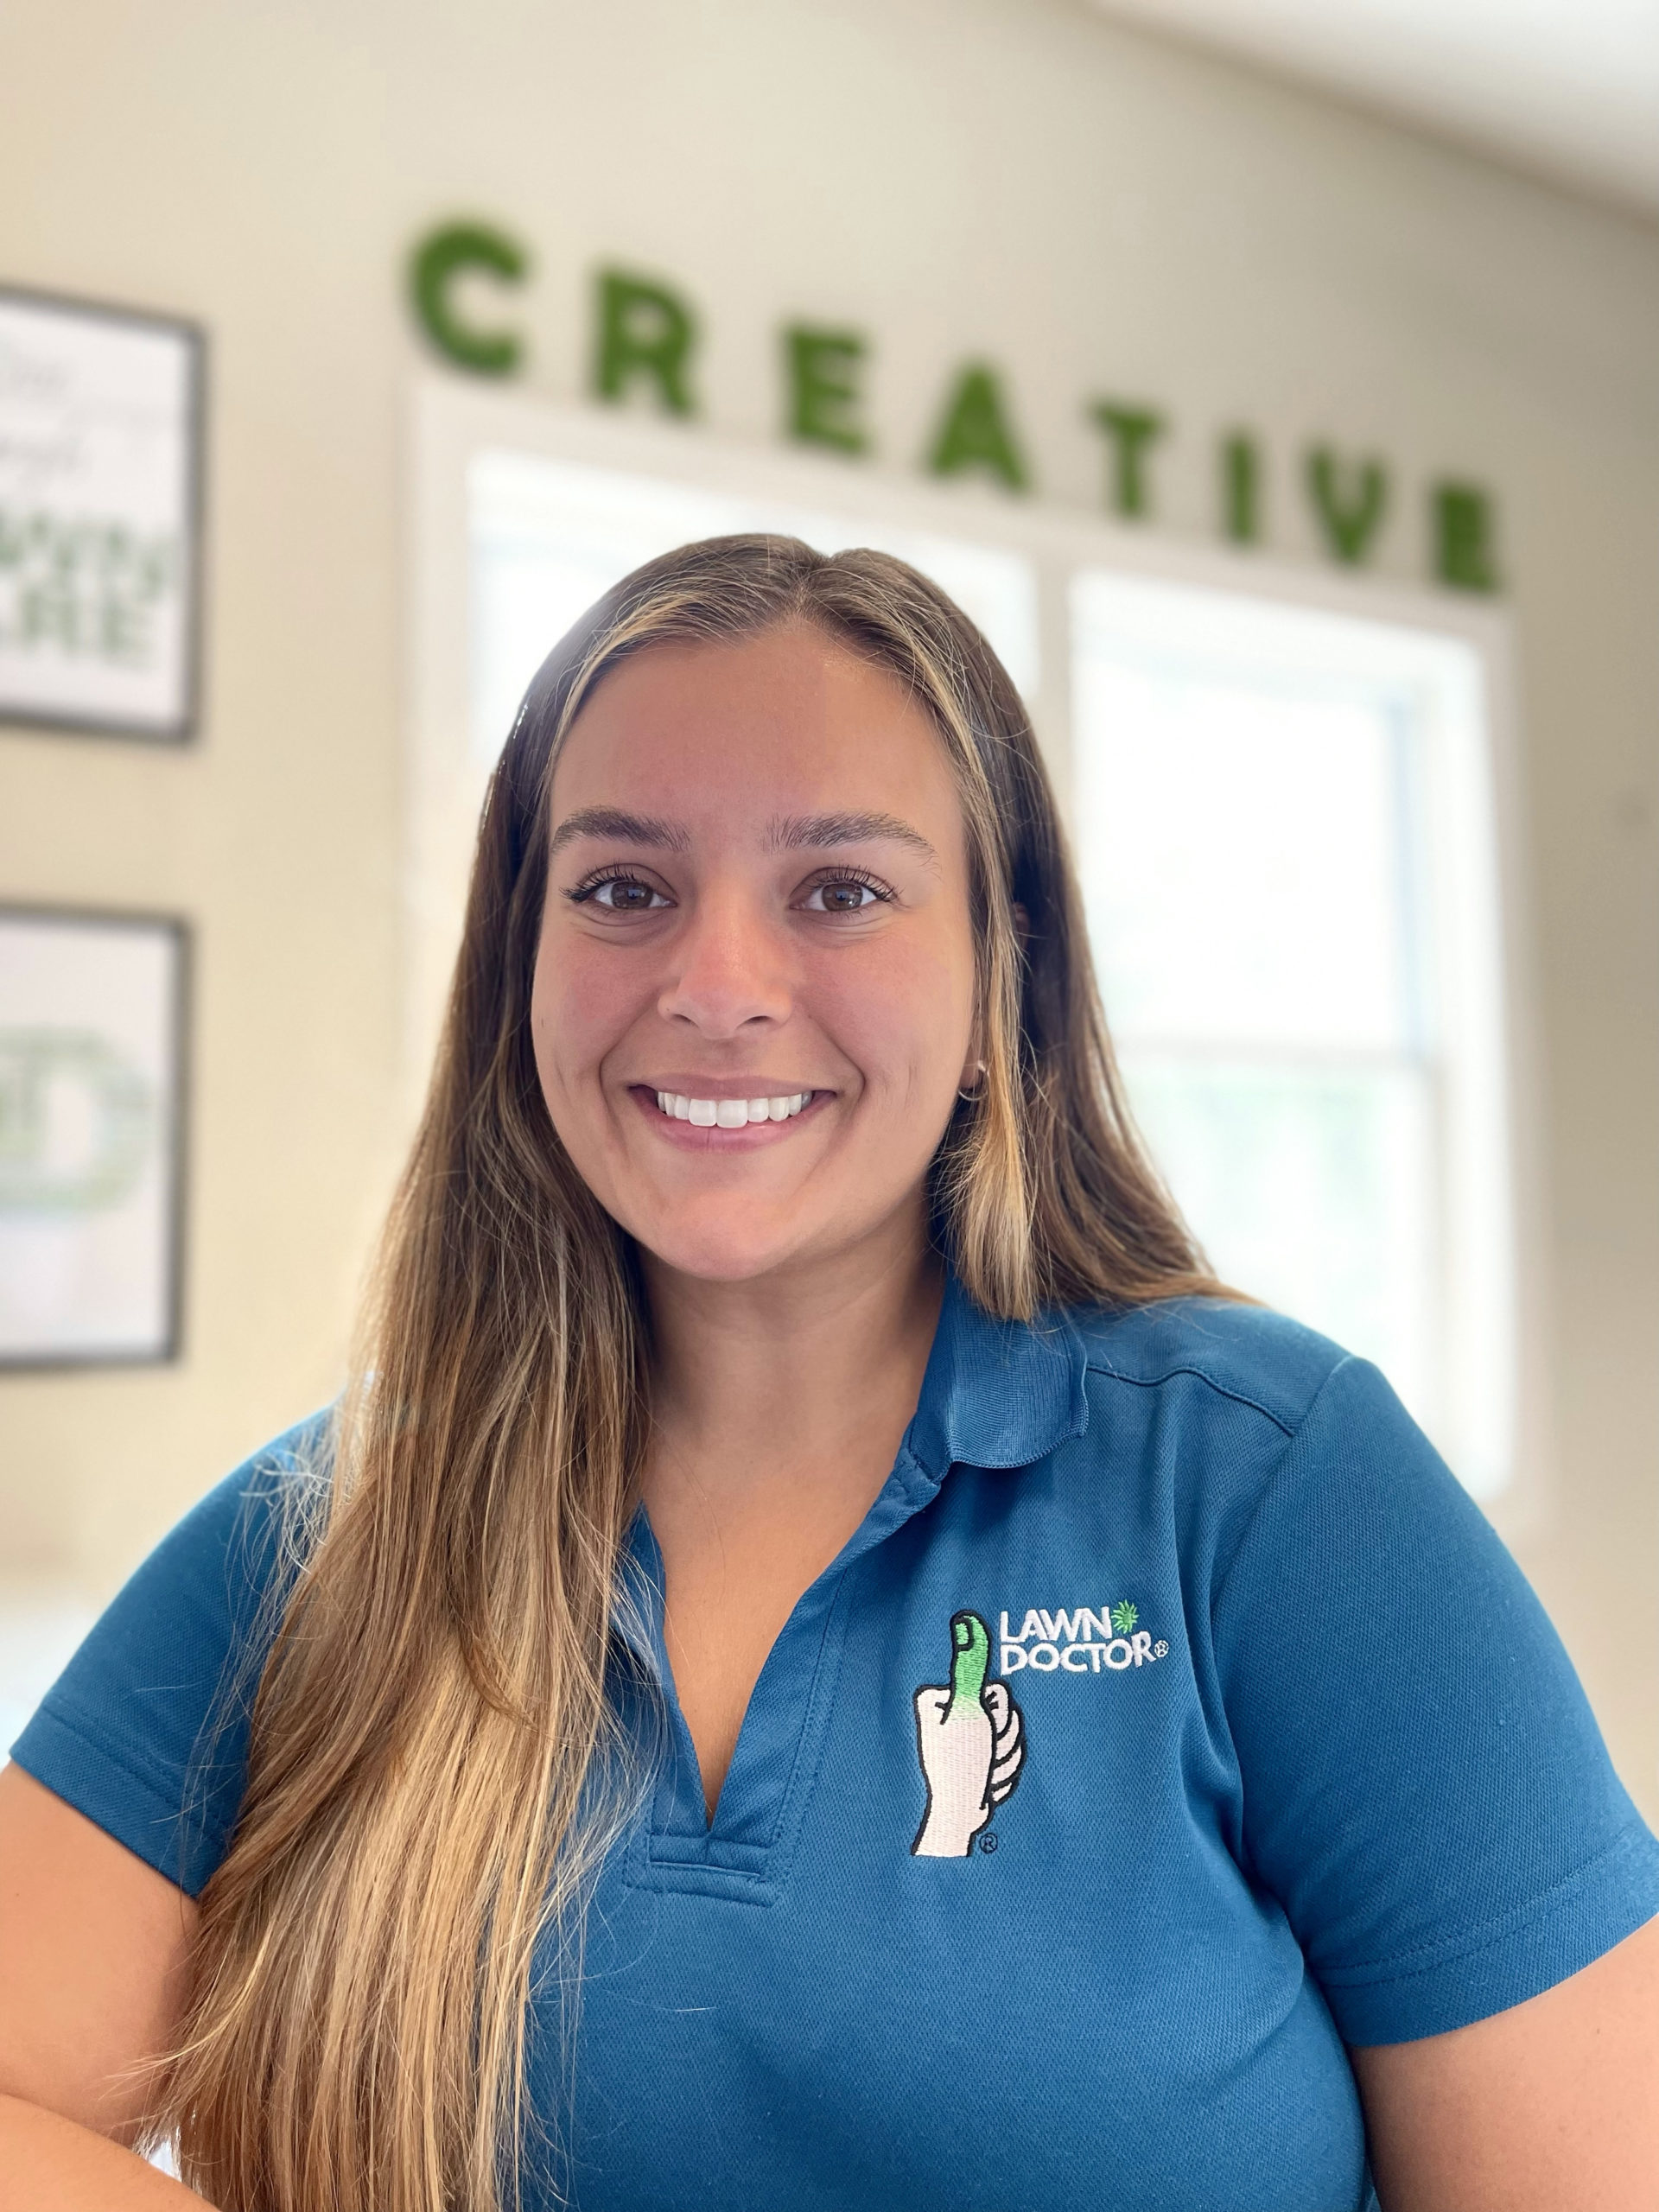 Lawn Doctor of South Shore Lawn Care Service Employee Amanda